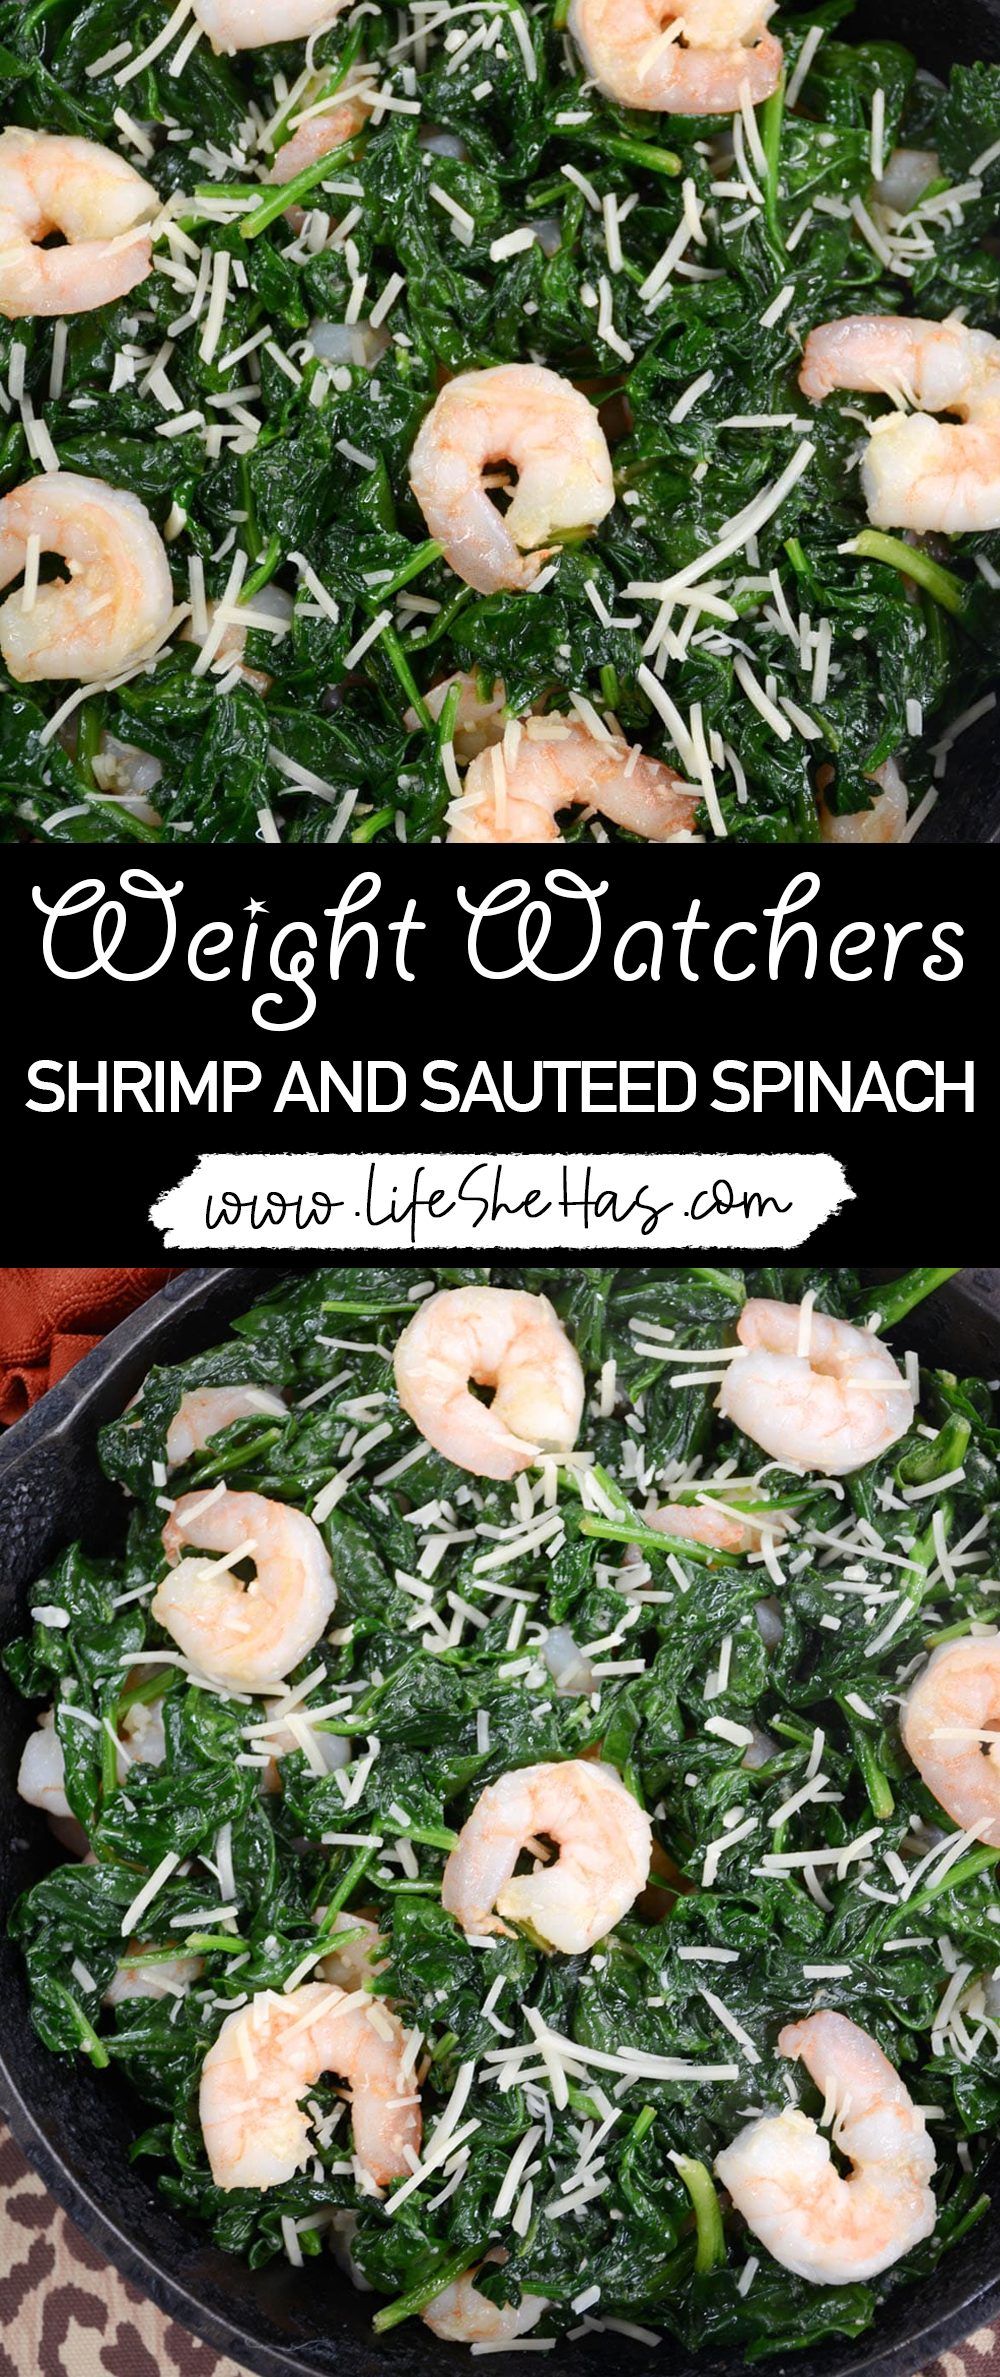 Weight Watchers Shrimp and Sauteed Spinach